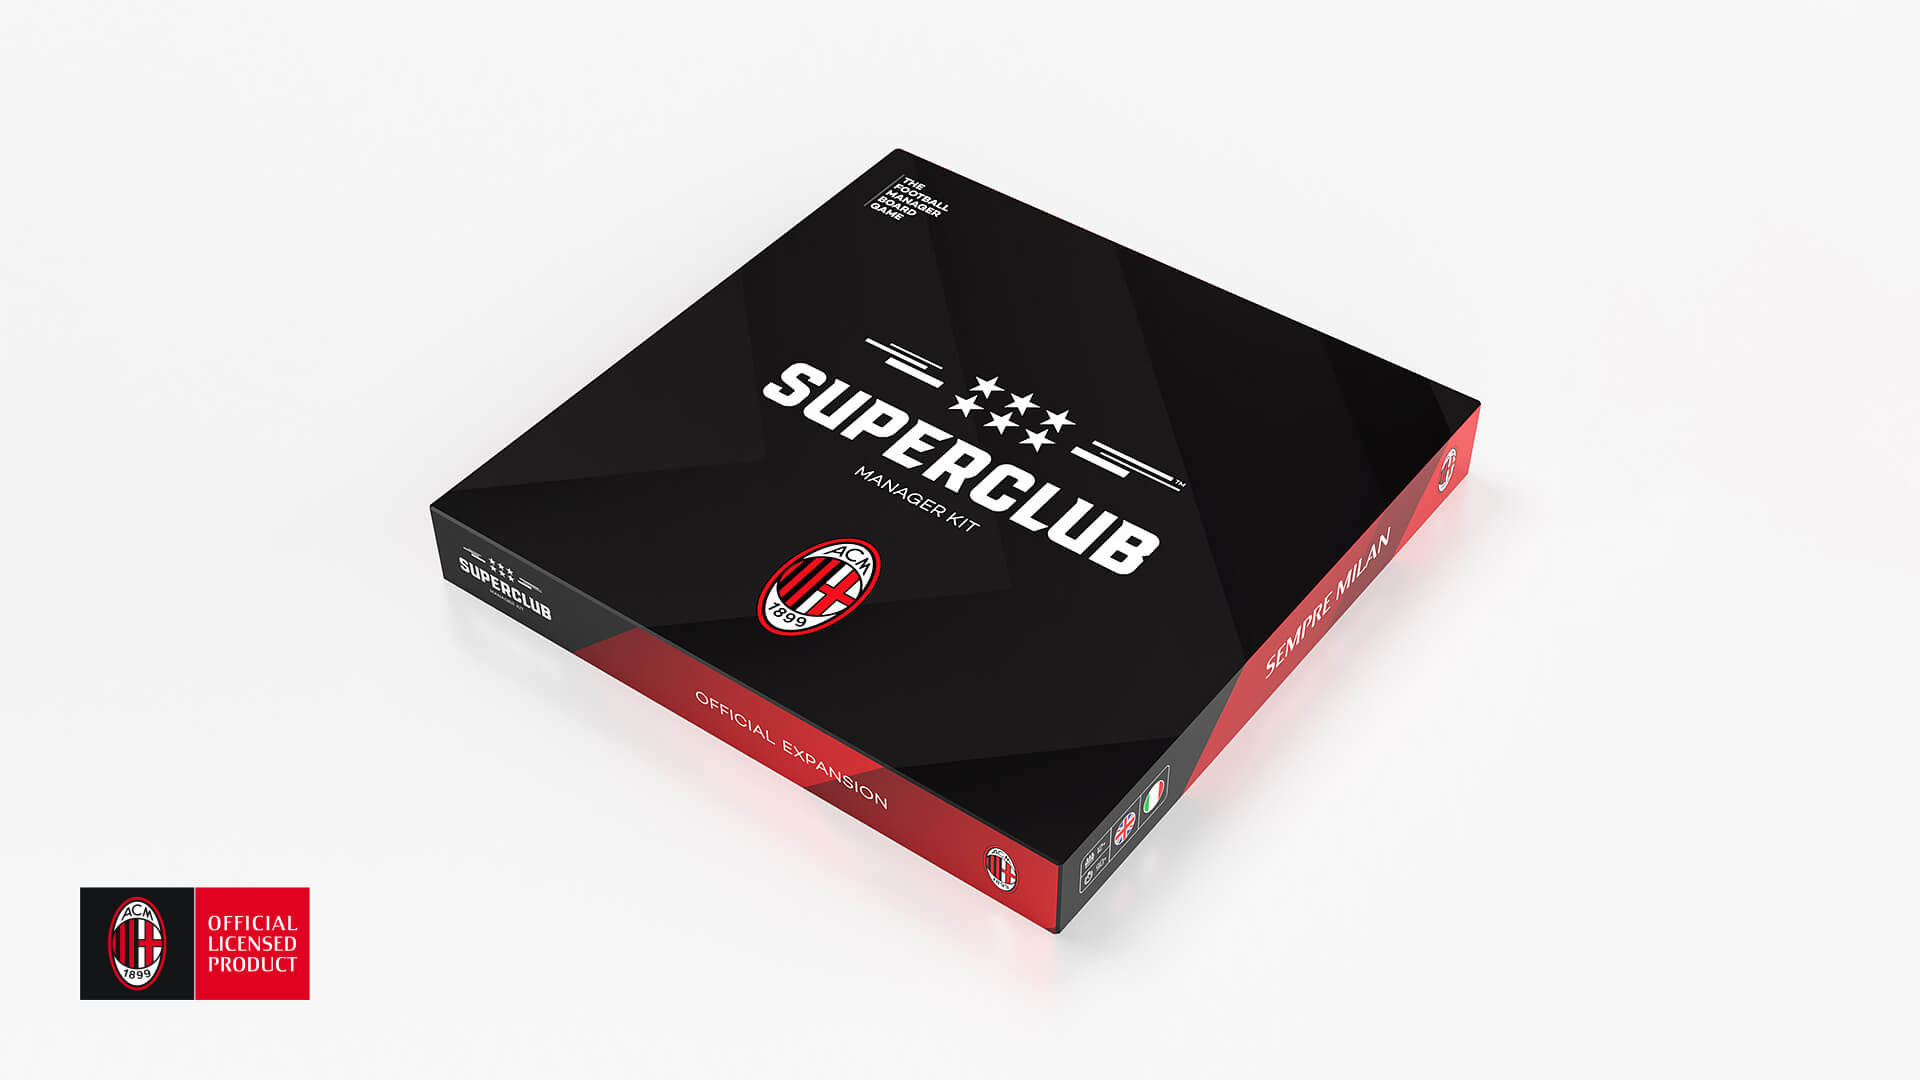 AC Milan is the first Italian club to join the Superclub family